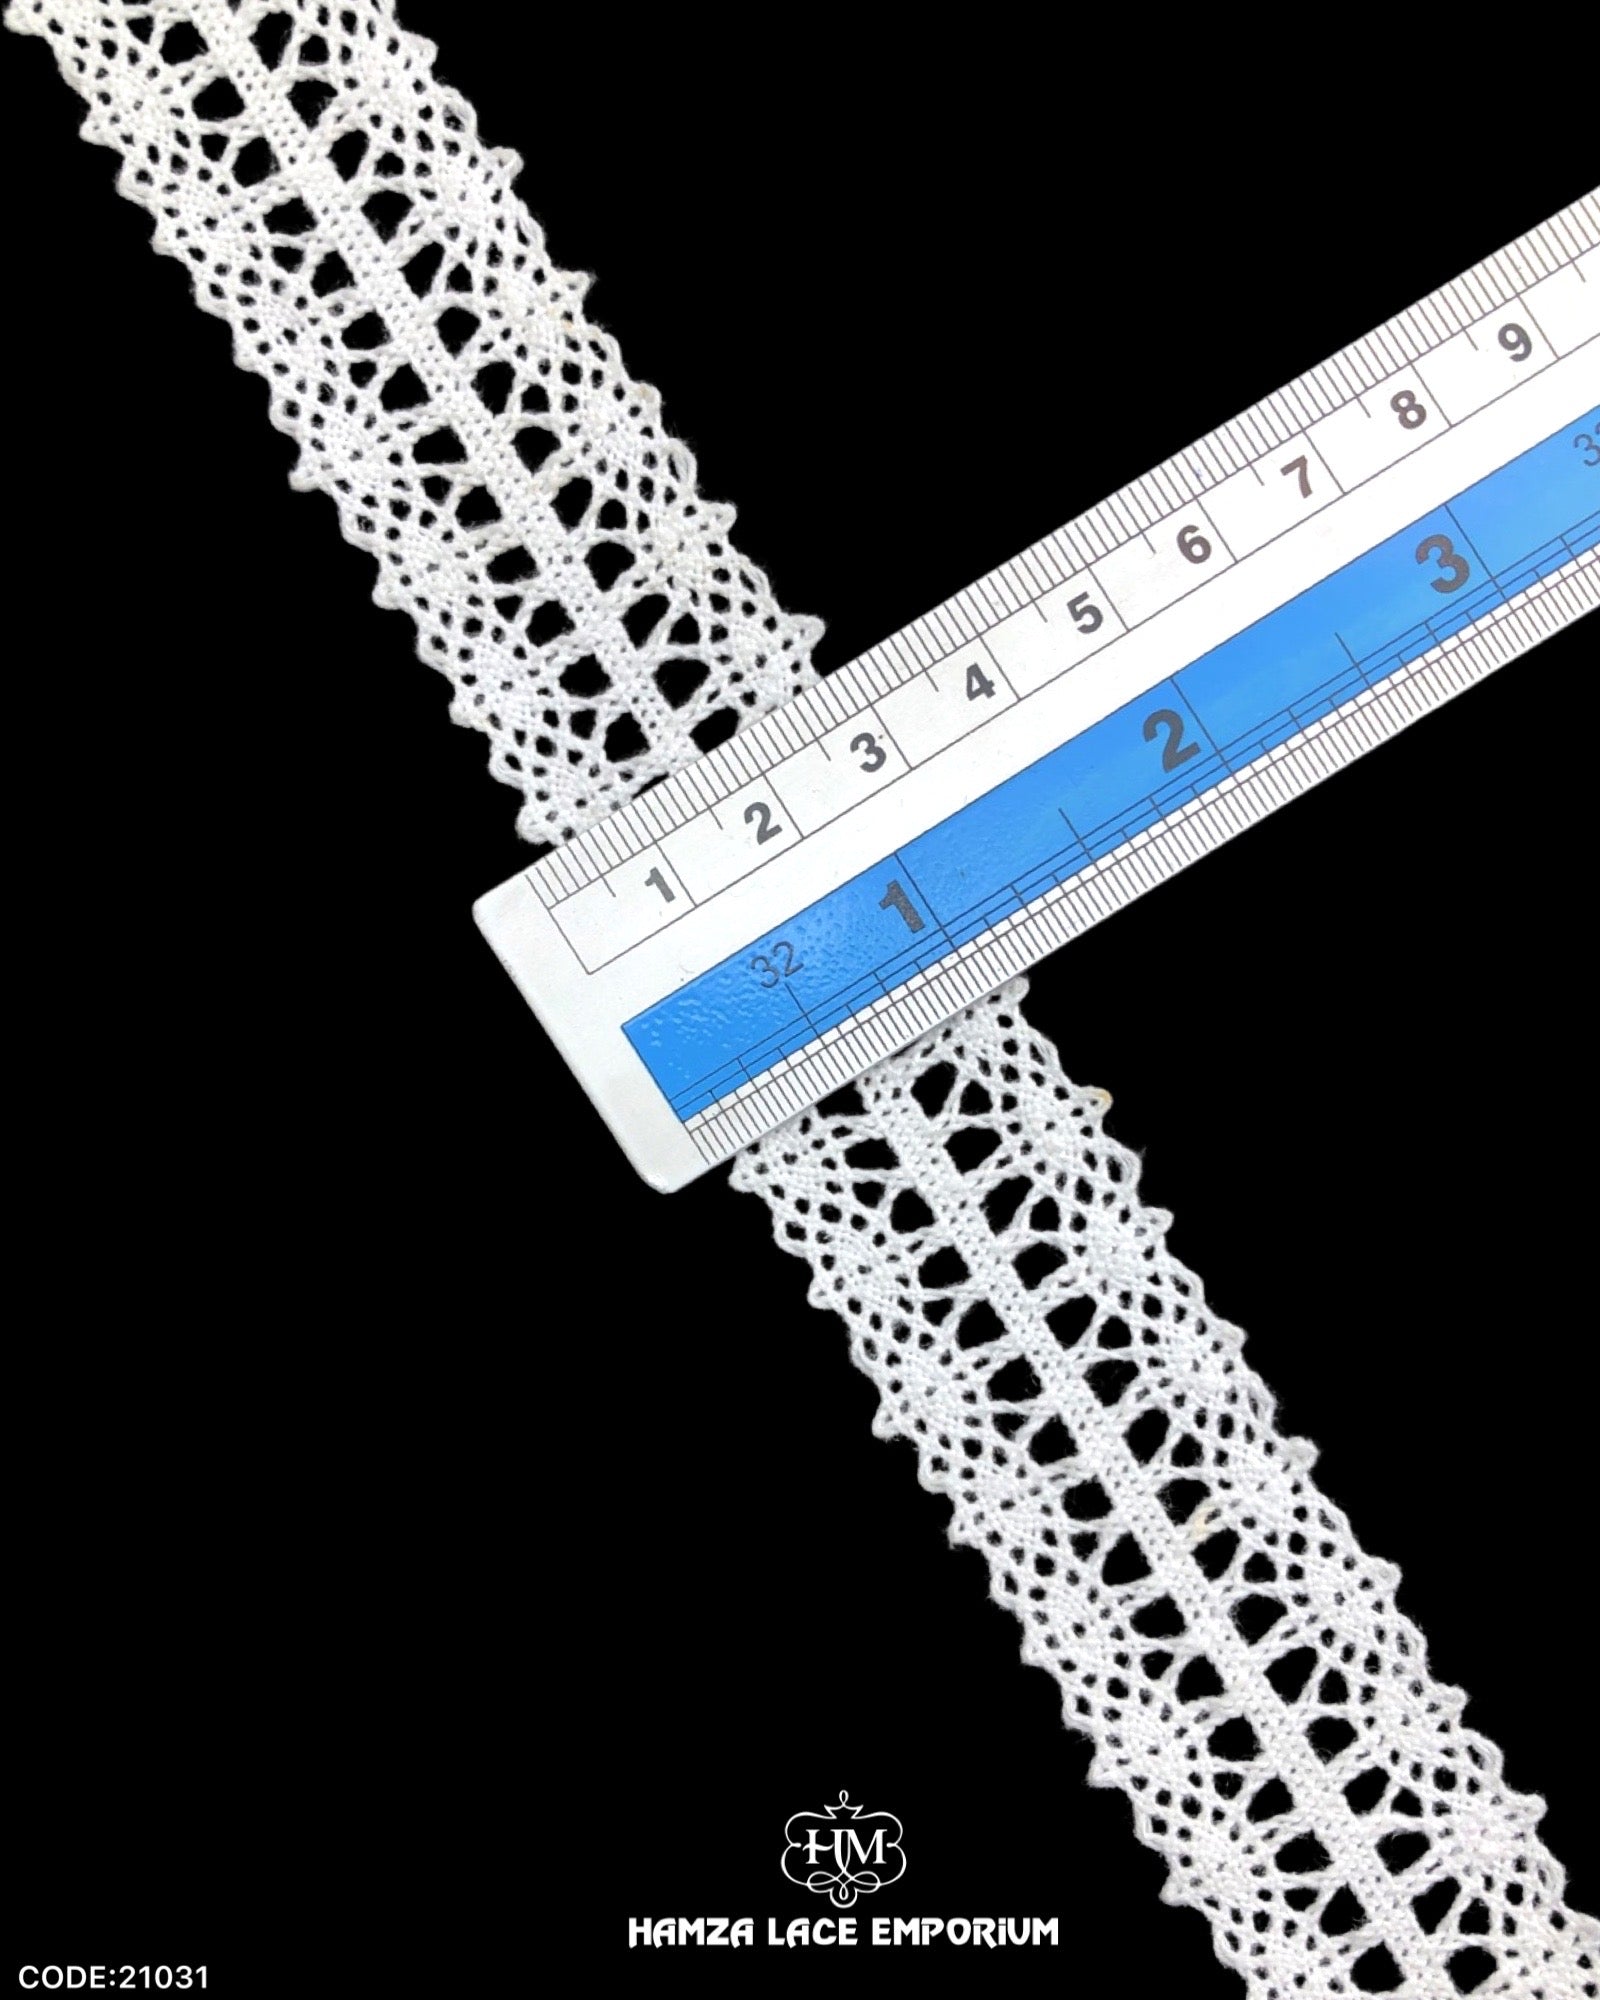 Size of the 'Center Filling Crochet Lace 21031' is given with the help of a ruler as '1' inch